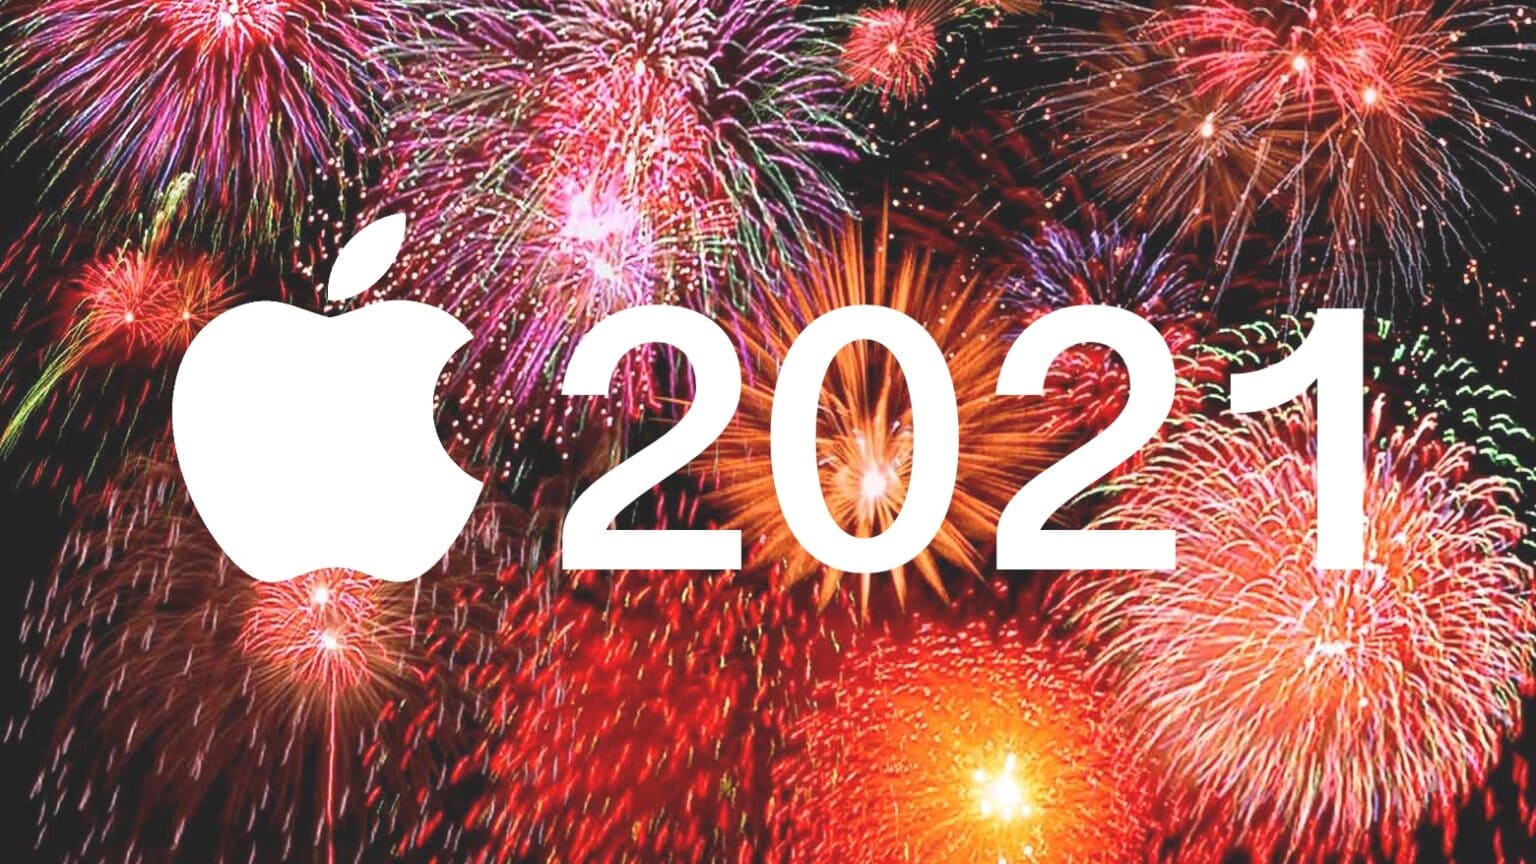 Expect Apple 2021 to bring exciting new MacBooks, iPads, Apple Watch features.